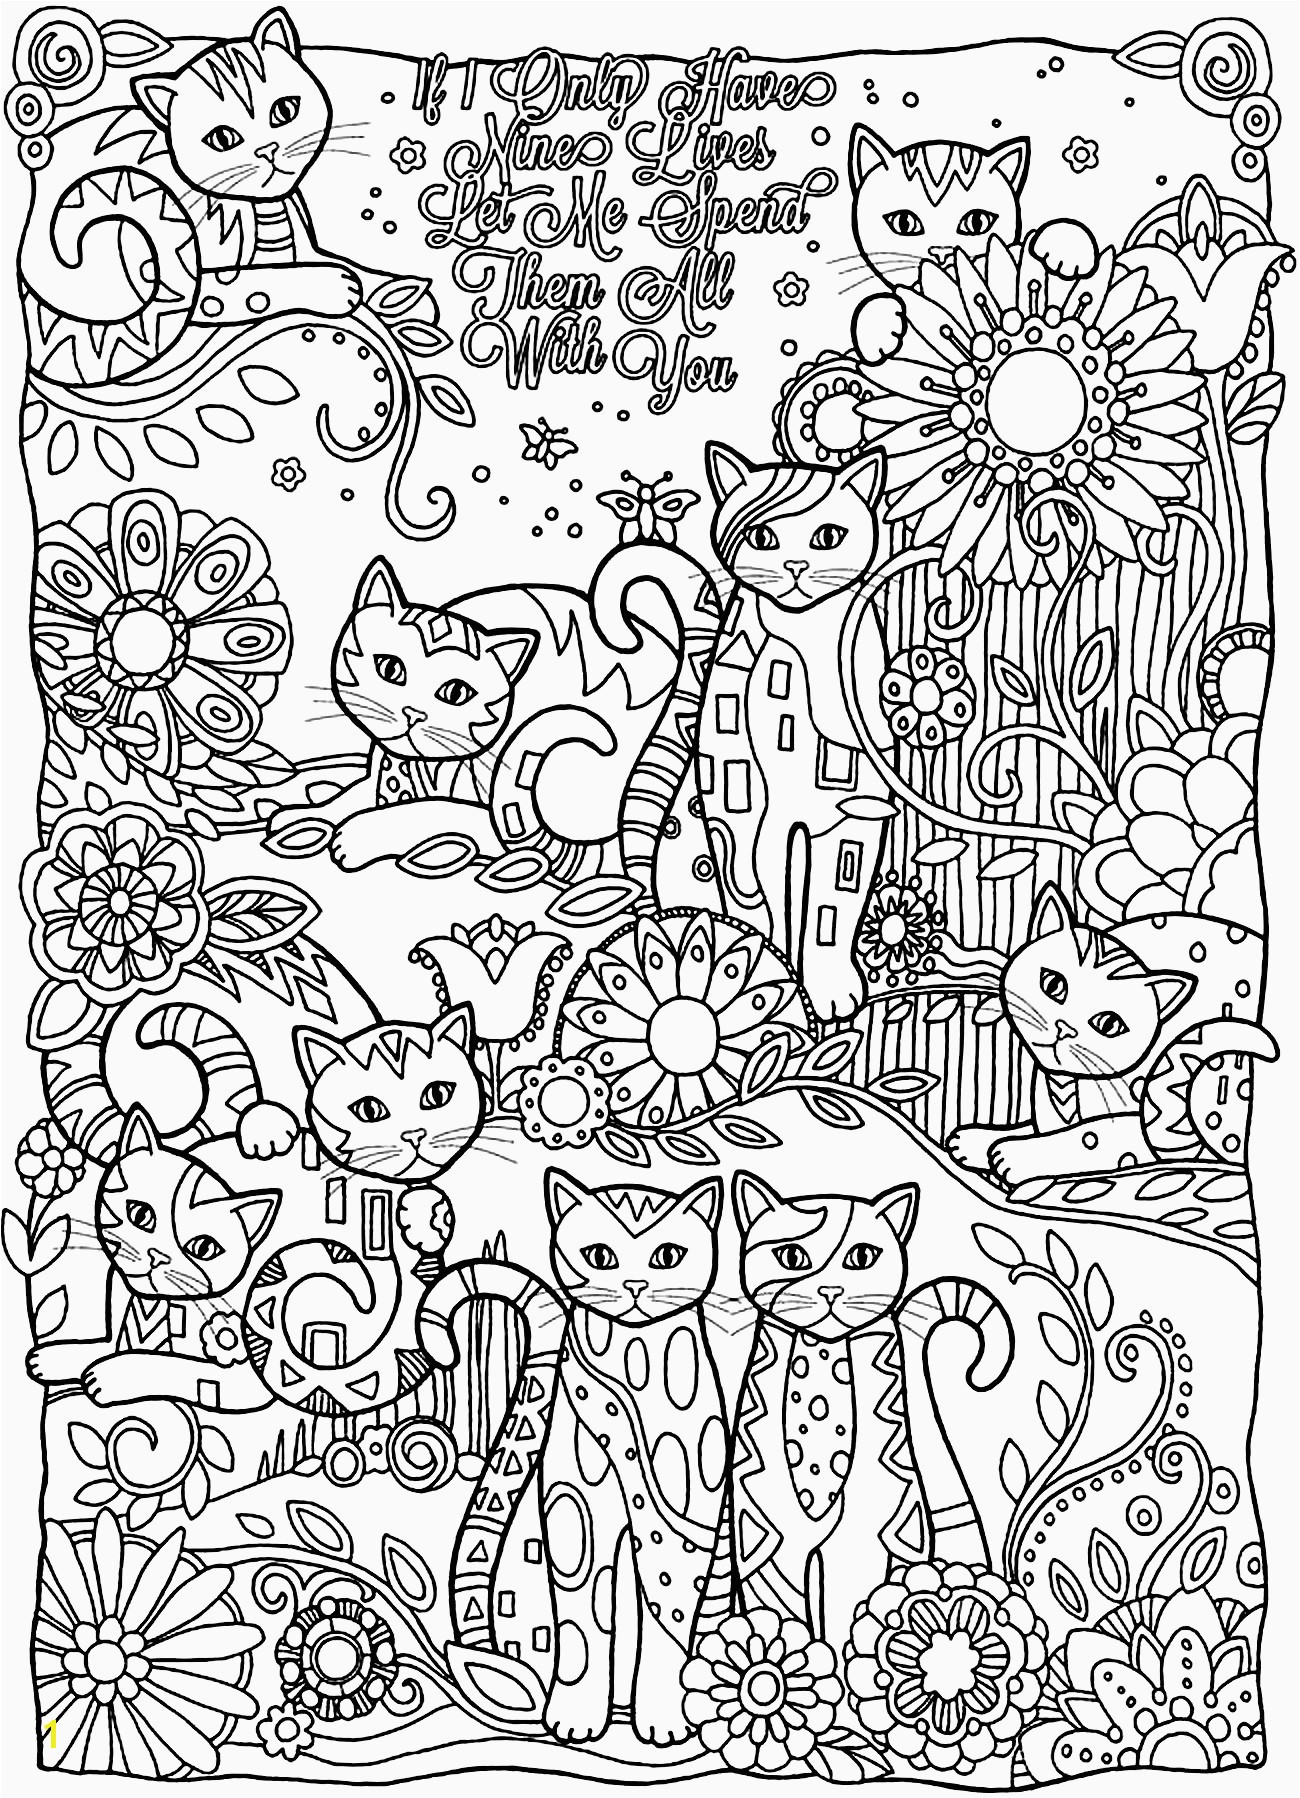 The Wonderful Wizard Of Oz Coloring Pages the Wonderful Wizard Oz Coloring Pages Fresh Easy Adult Coloring